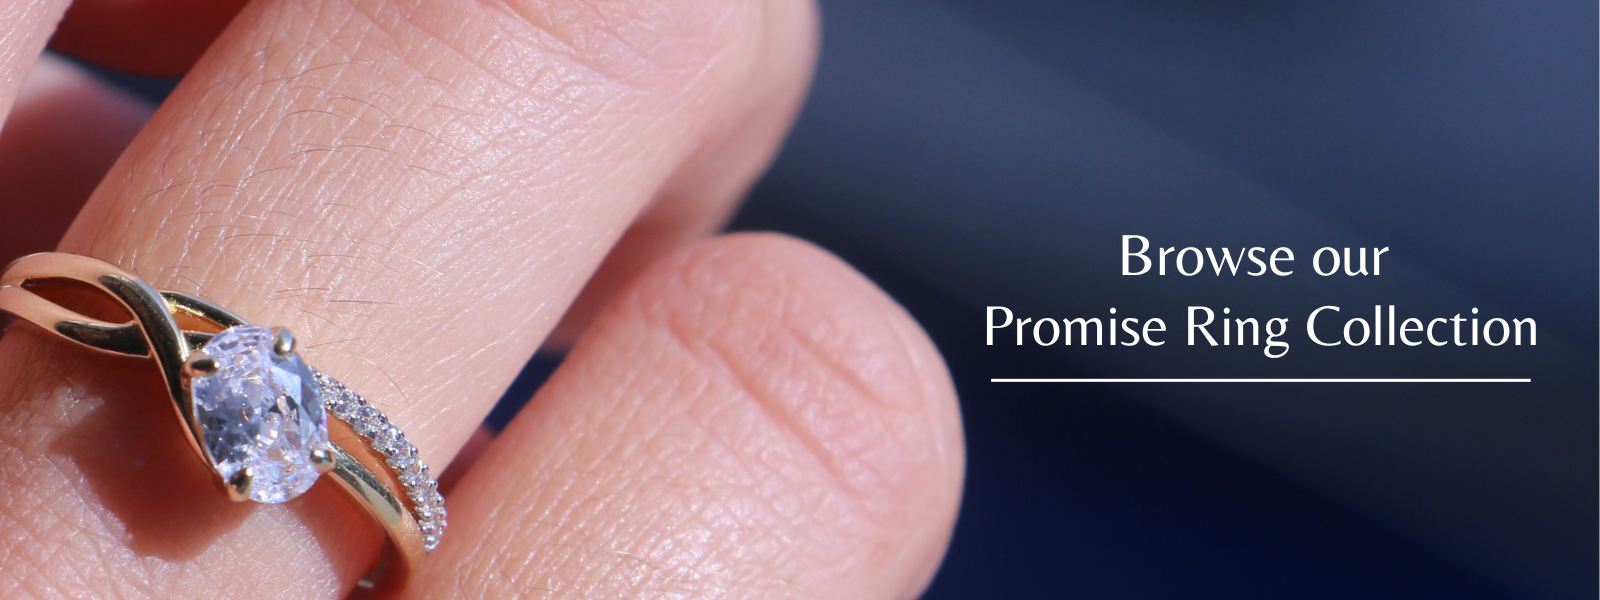 Photo of close up of gold promise ring on finger with the text browse our promise ring collection